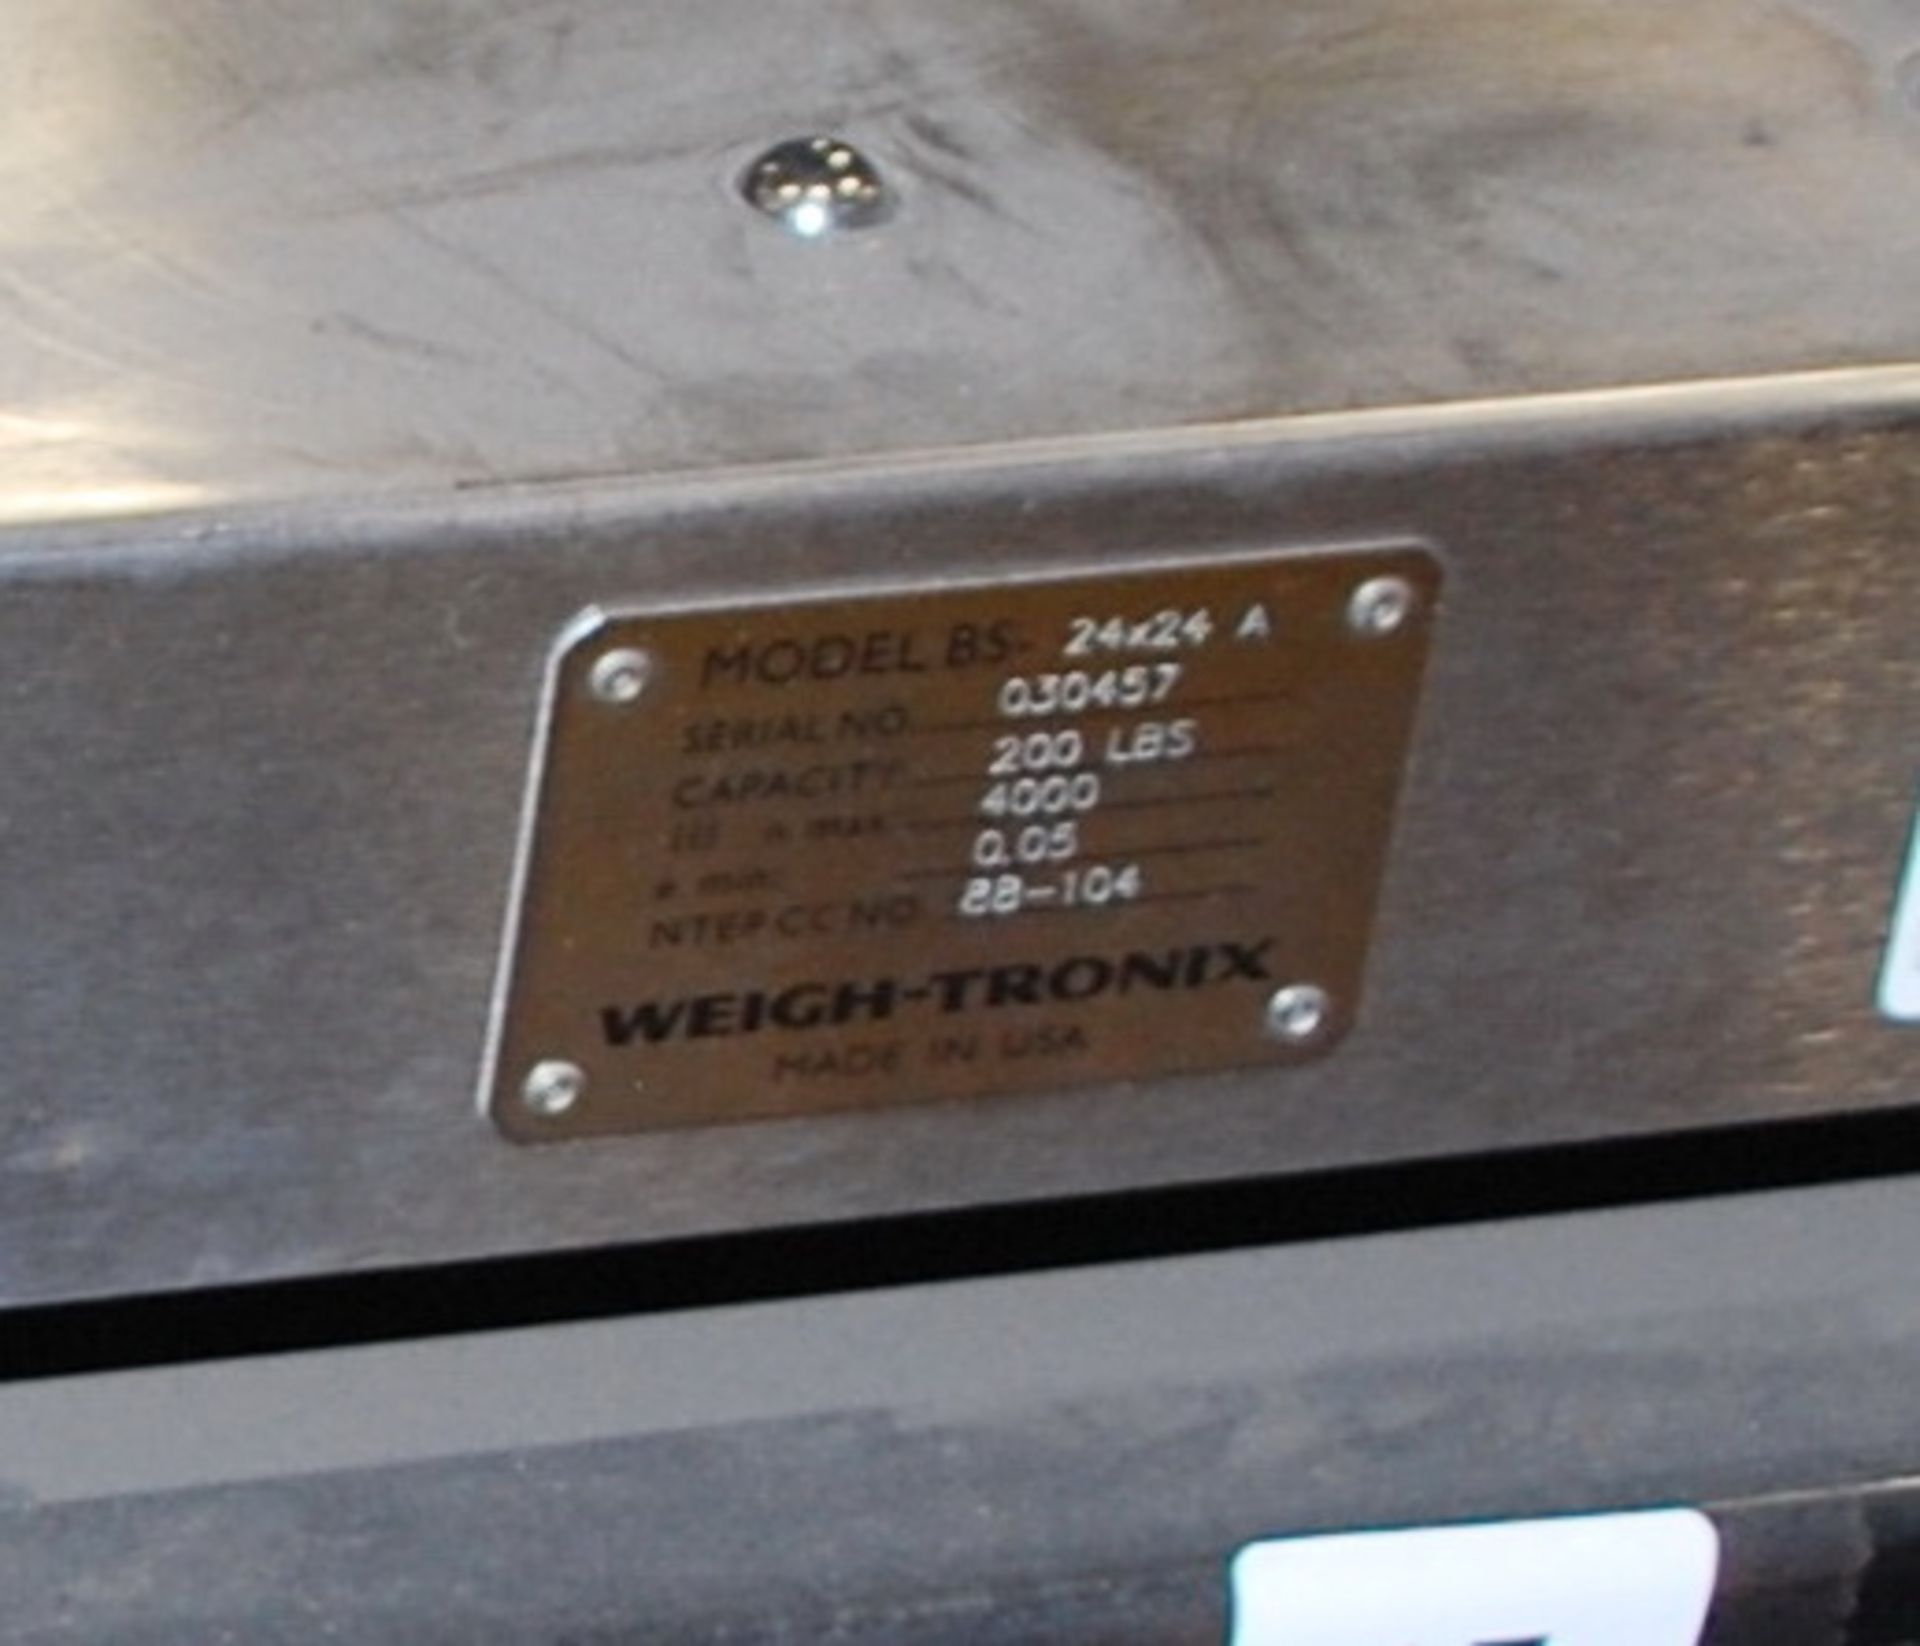 Weigh-Tronix Model 24x24A, 200lbs., digital weigh scale on stand with readout - Image 2 of 3